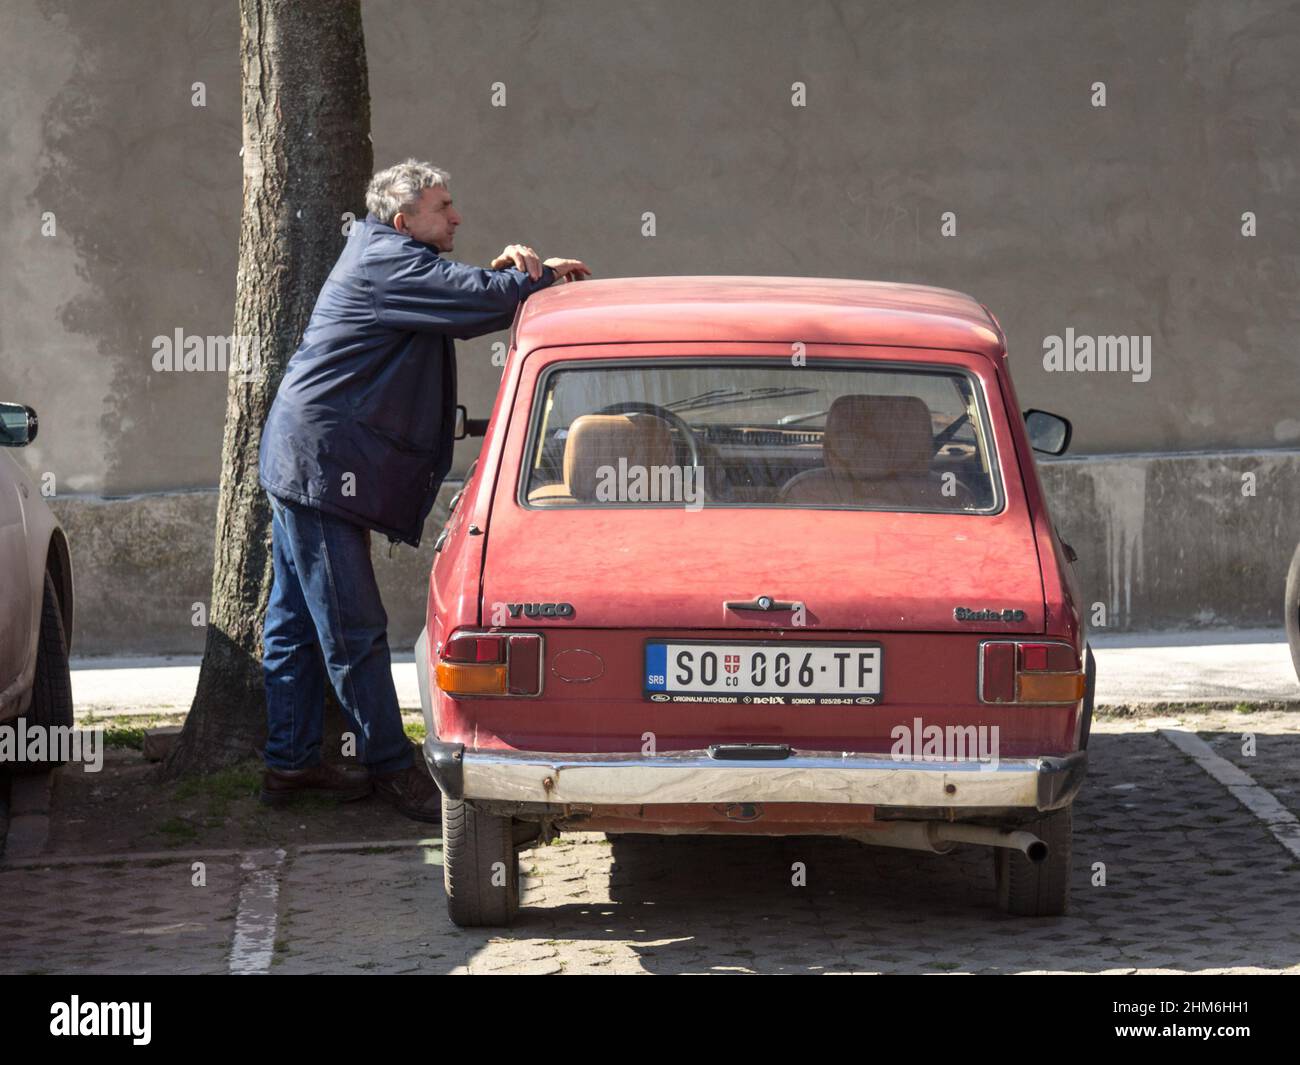 Picture of a Skala car, red colors, branded as Zastava 55 and Yugo 55, parked in a car park of Sombor Serbia with an old man standing on it. Skala is Stock Photo